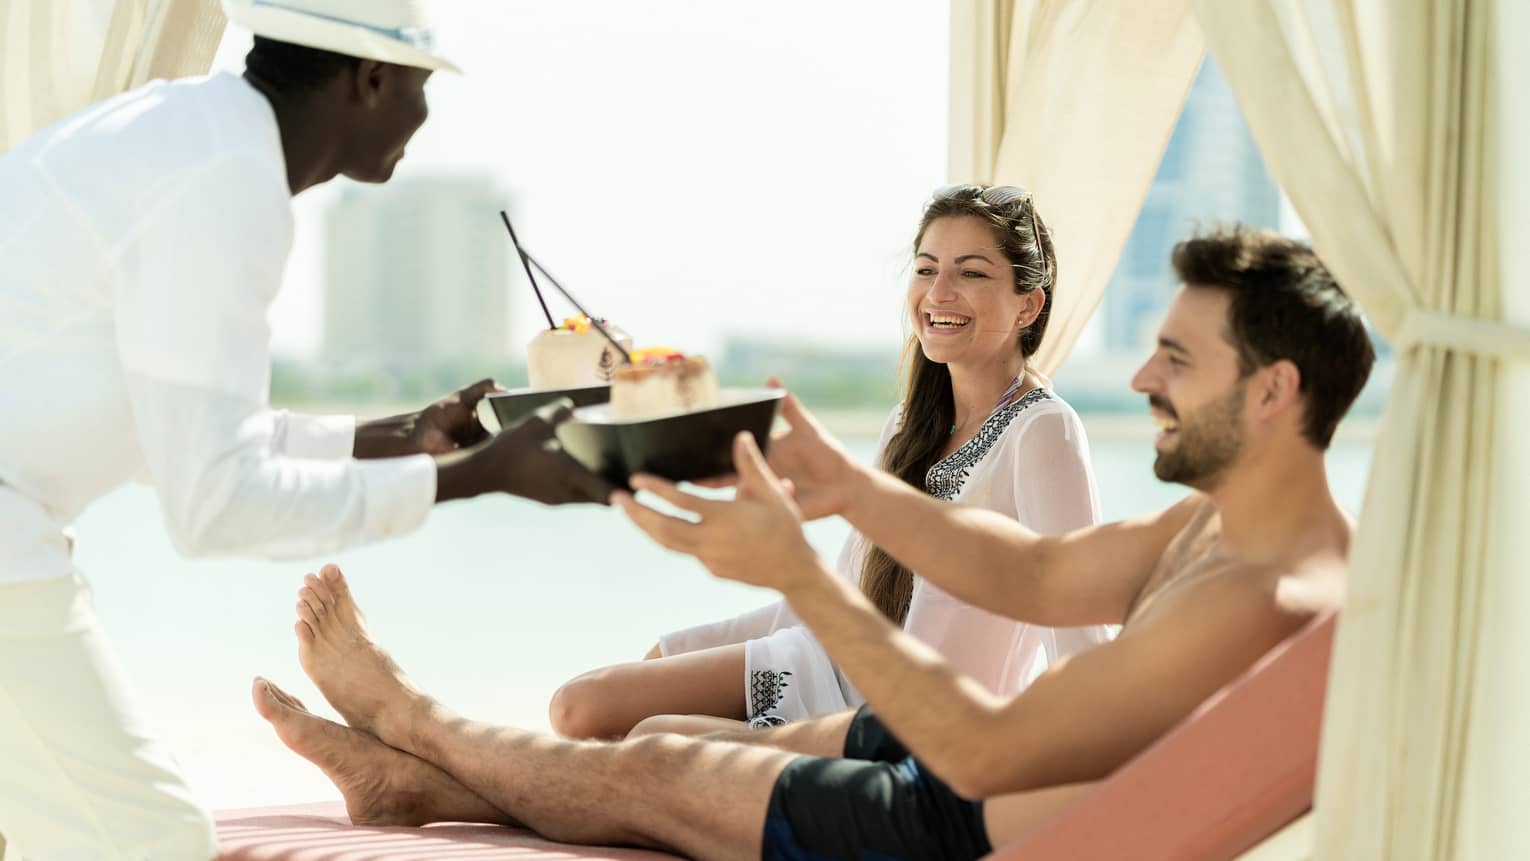 A four seasons staff hands two dishes to a man and woman as they lounge poolside